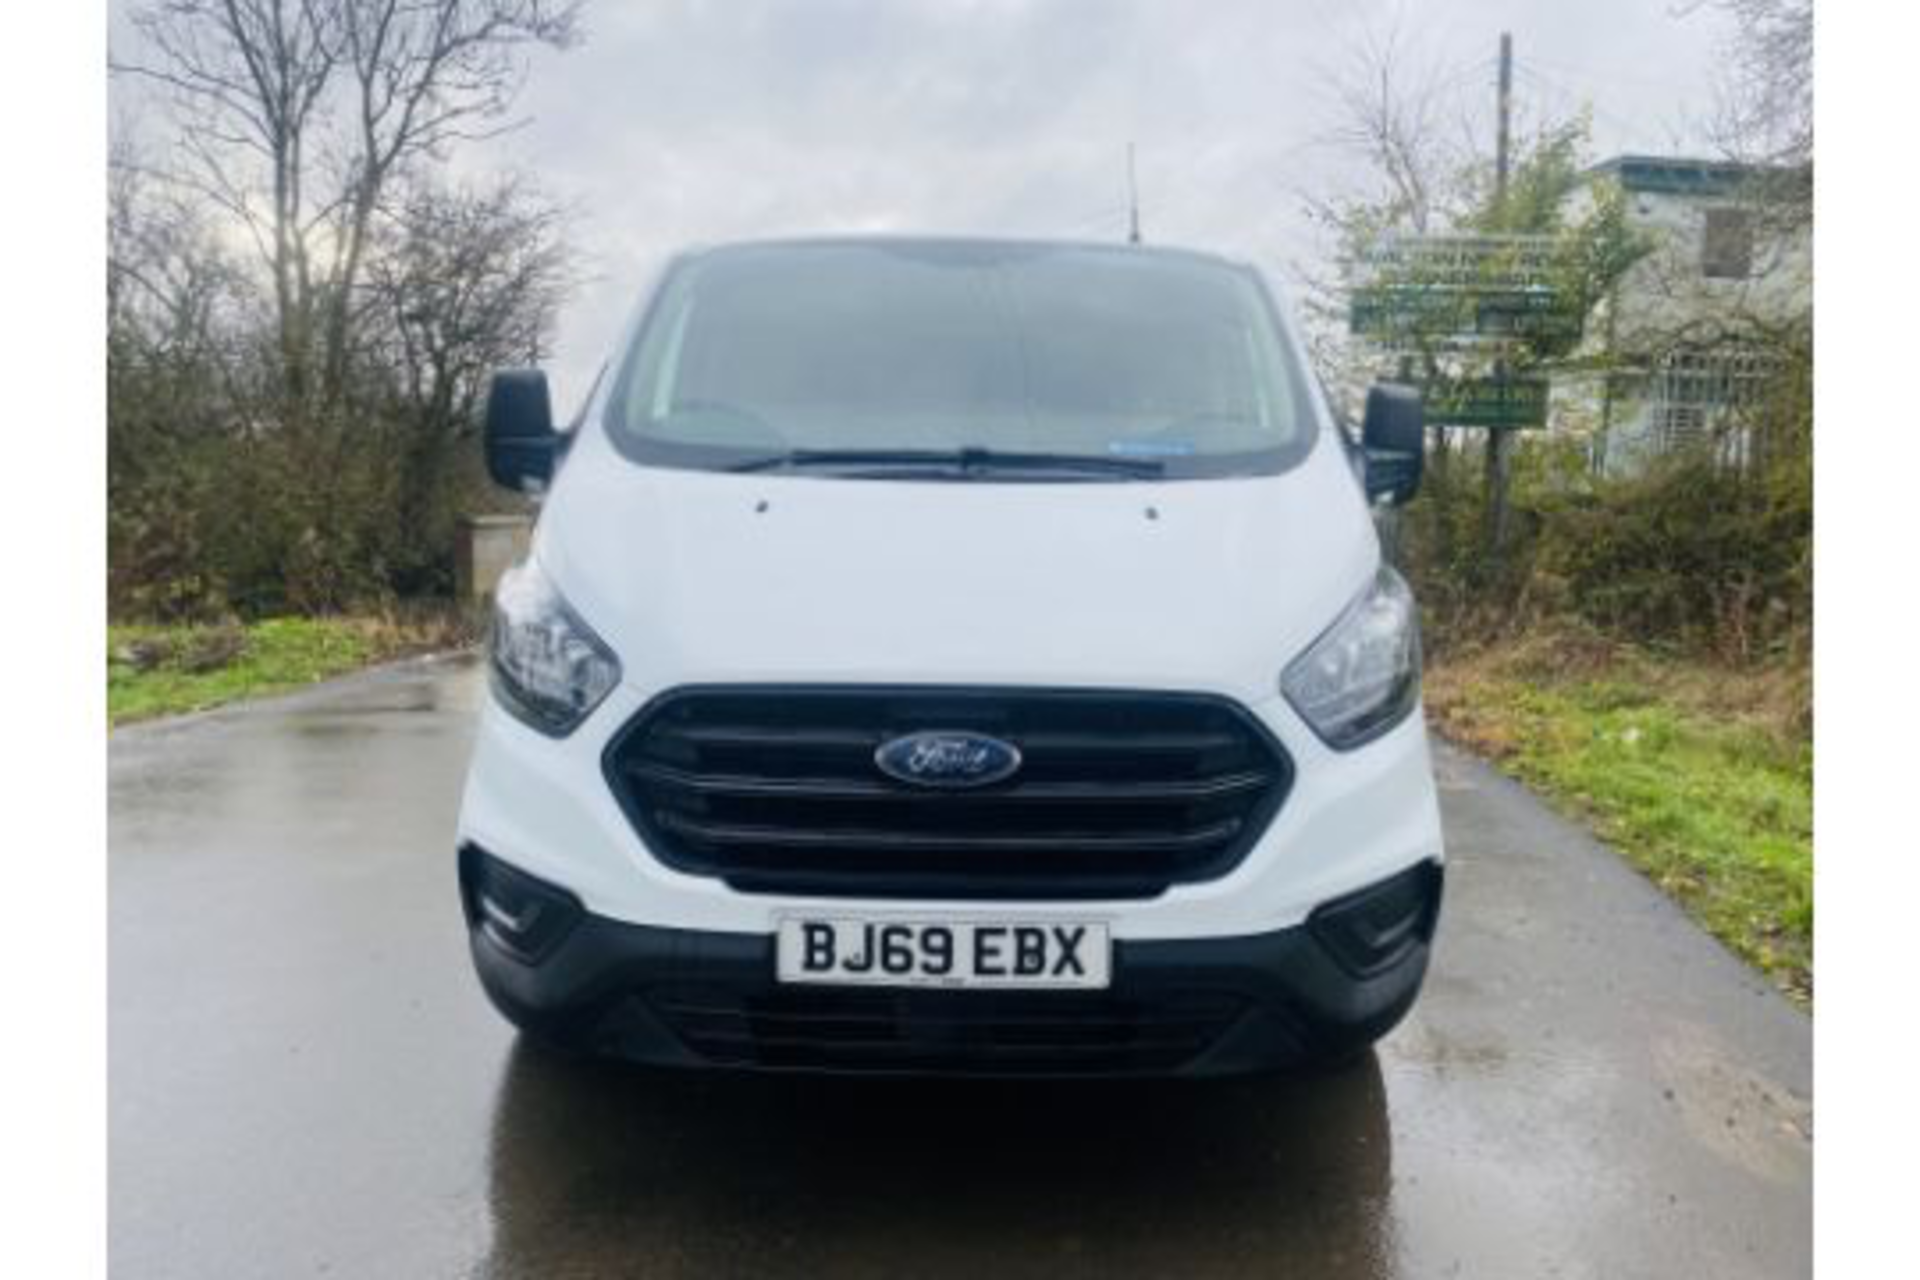 (ON SALE) FORD TRANSIT CUSTOM 2.0TDCI (300) EURO 6 - (2020 MODEL) 1 OWNER - FSH - AIR CONDITIONING - - Image 4 of 24